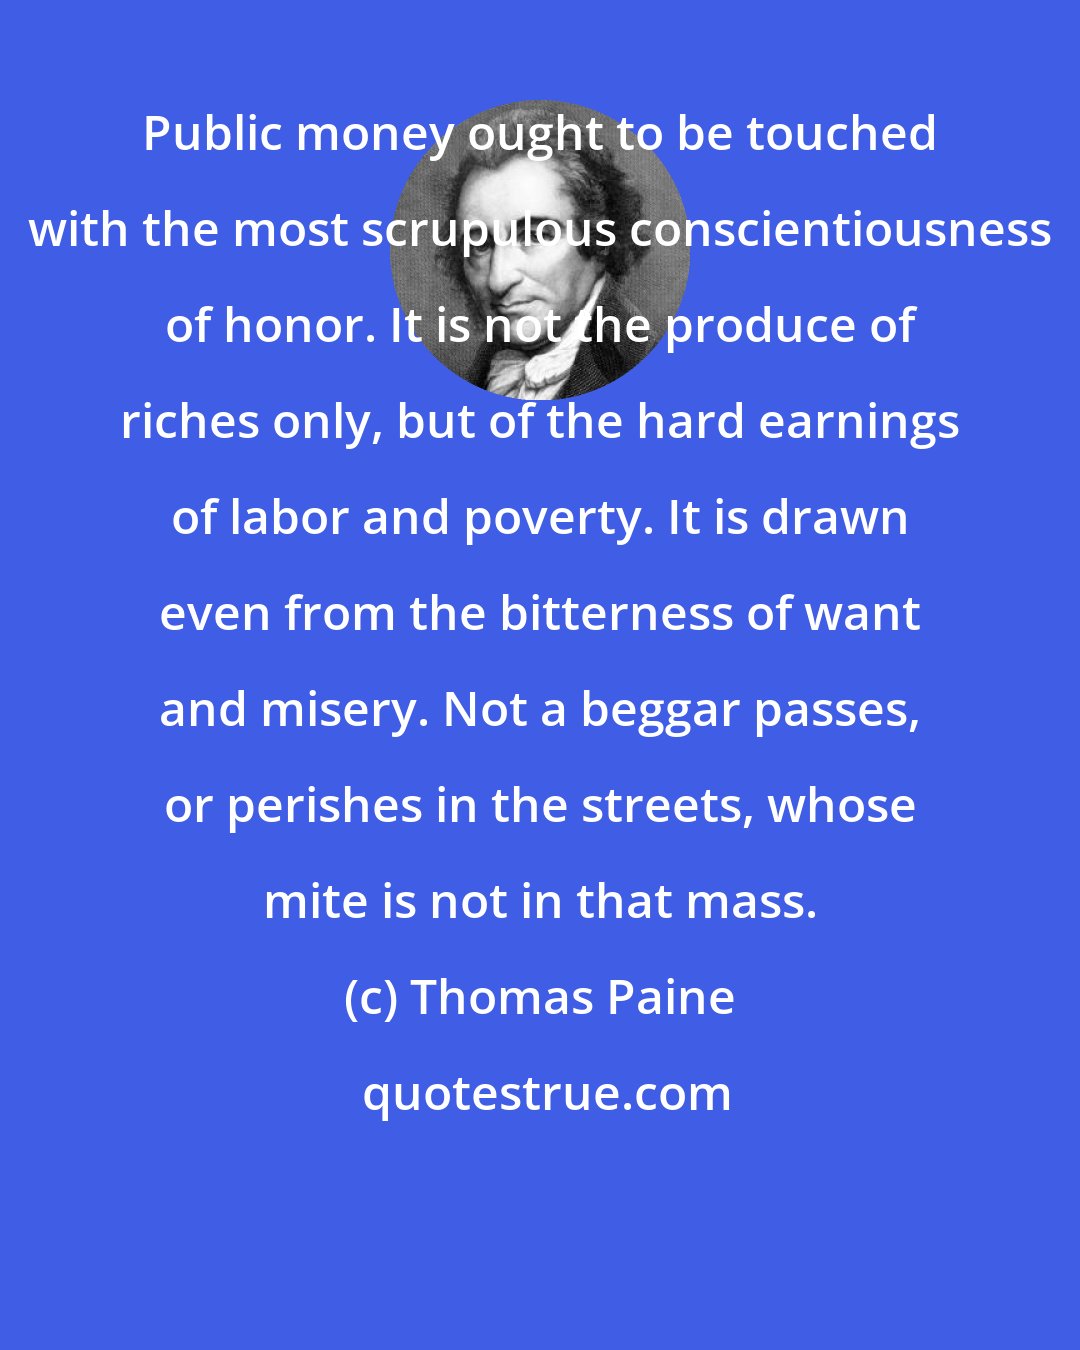 Thomas Paine: Public money ought to be touched with the most scrupulous conscientiousness of honor. It is not the produce of riches only, but of the hard earnings of labor and poverty. It is drawn even from the bitterness of want and misery. Not a beggar passes, or perishes in the streets, whose mite is not in that mass.